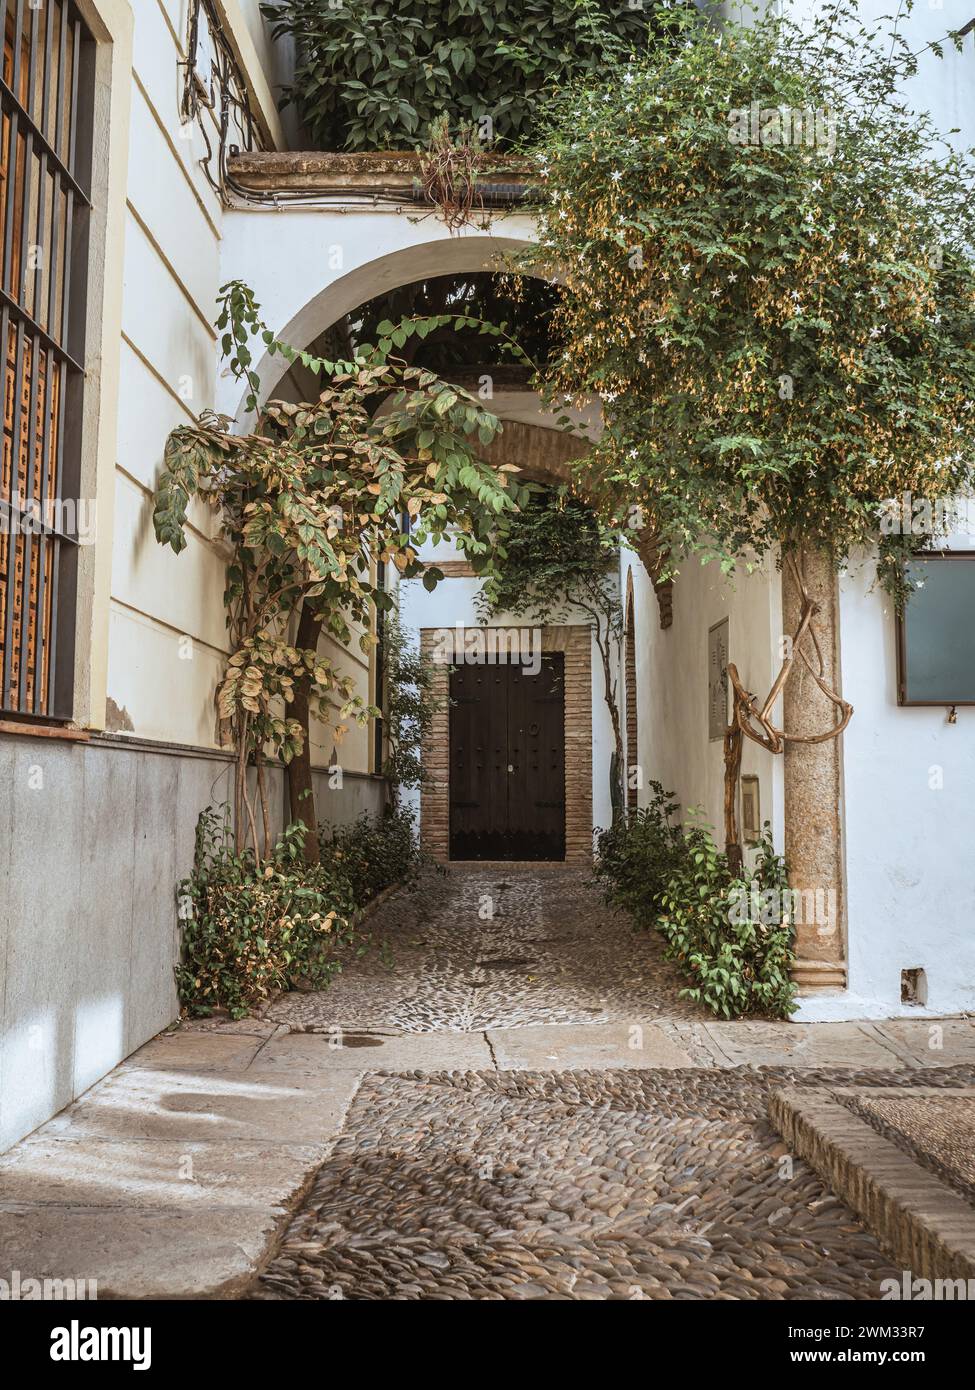 View of empty cobblestone courtyard patio in the historical old town of Cordoba, Andalusia, Spain, in the historical neighborhood, white painted build Stock Photo